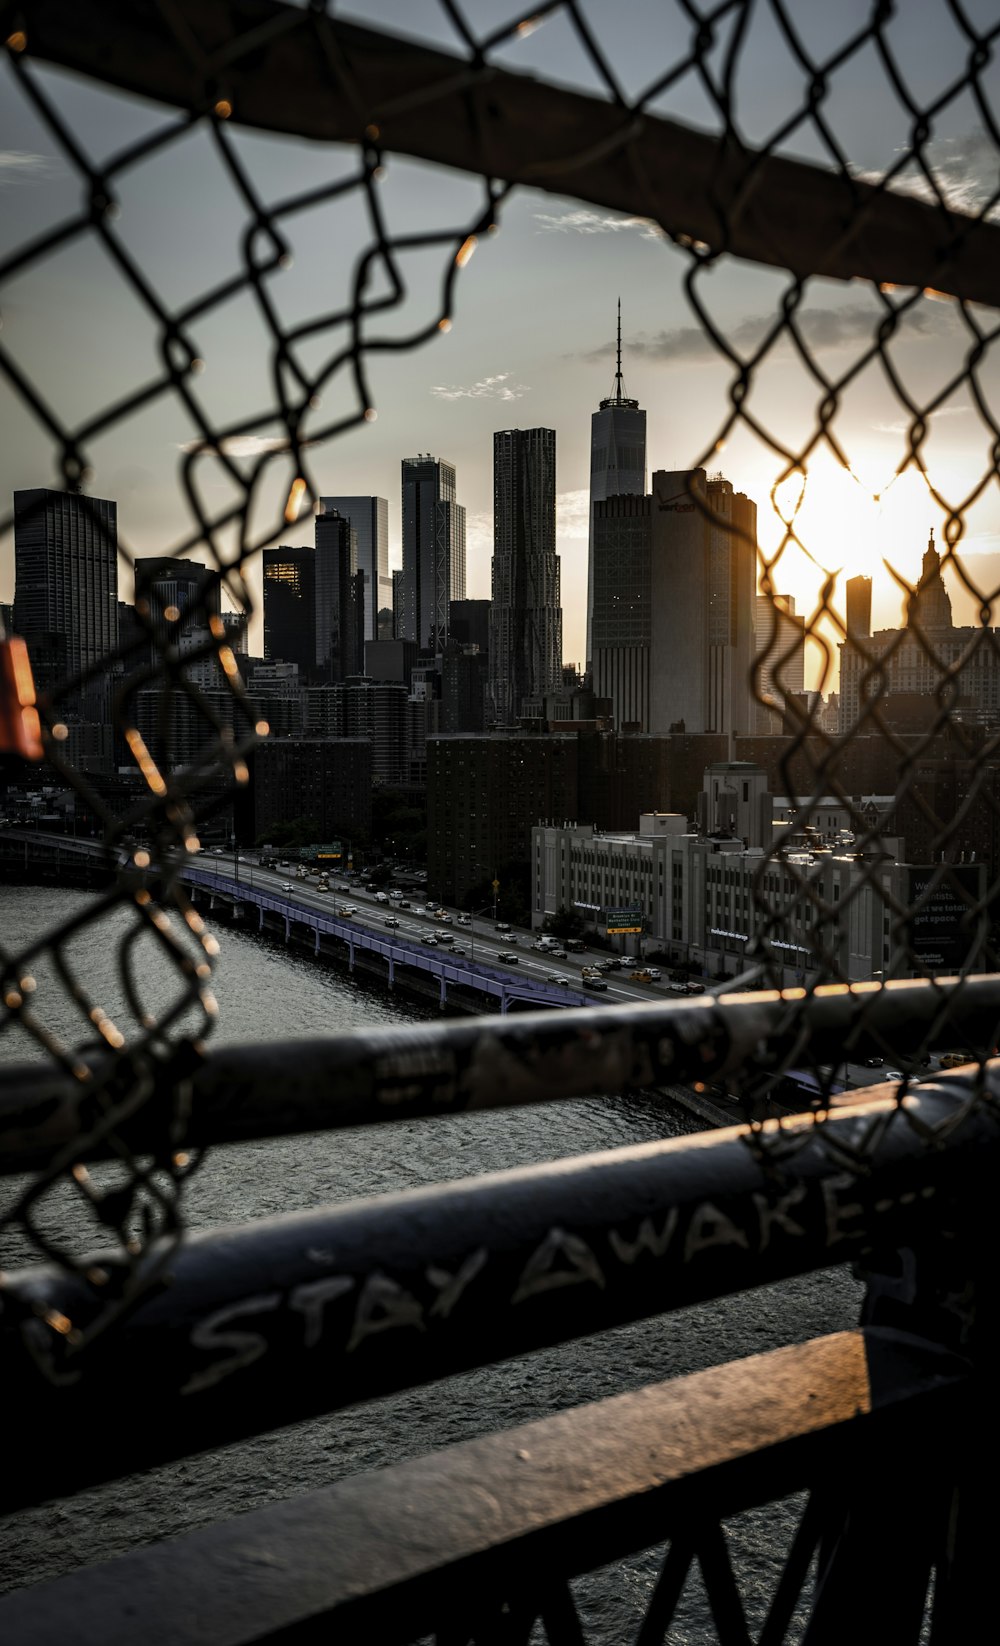 chain link fence overlooking high rise building